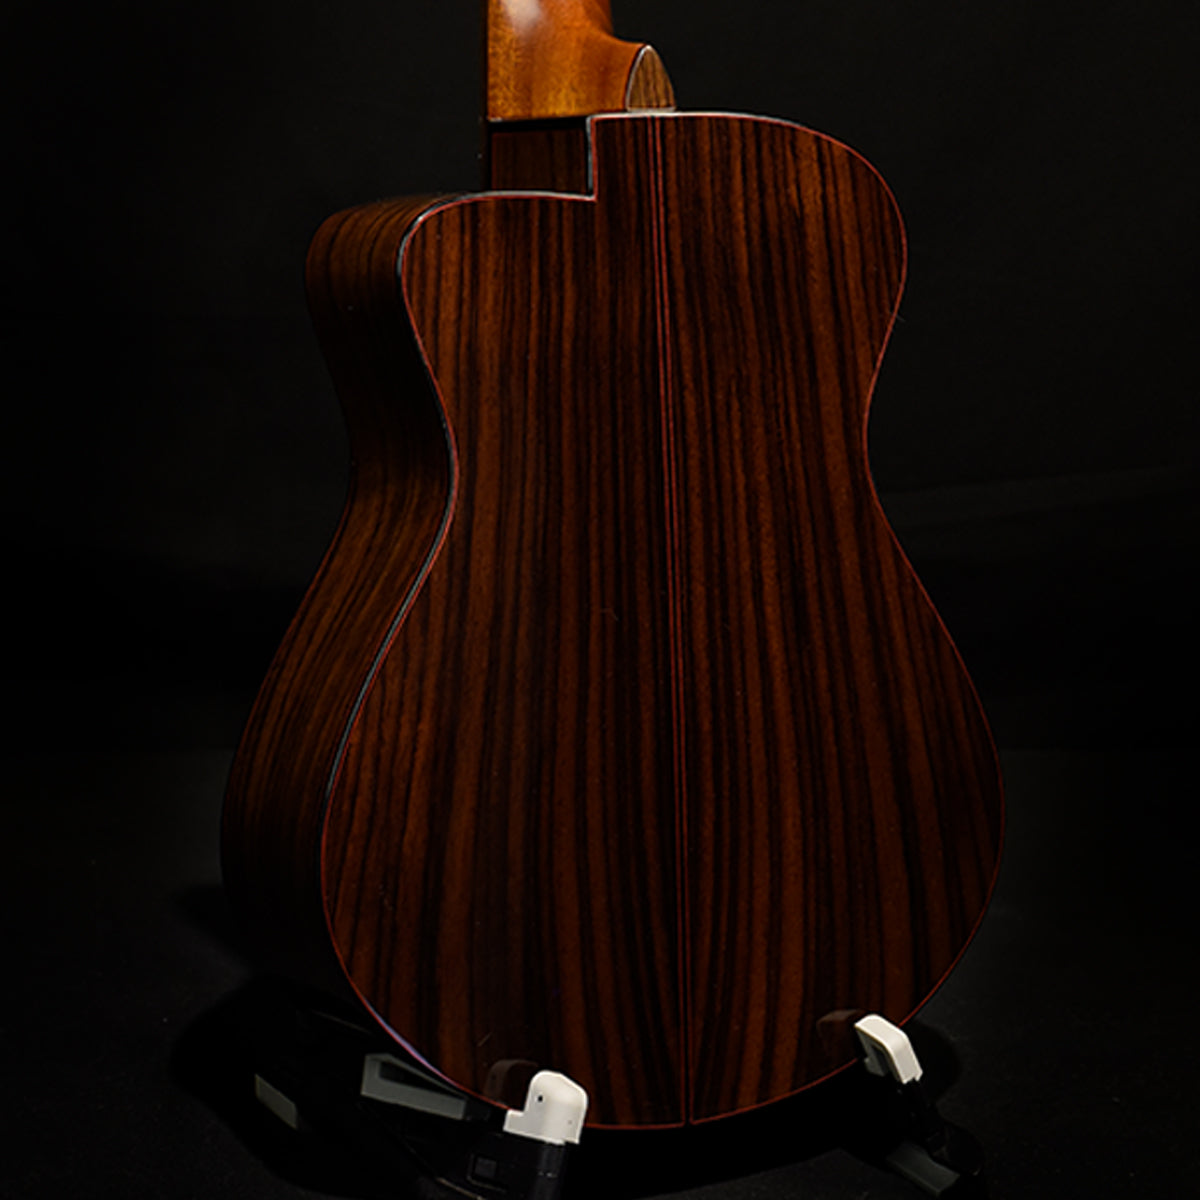 Green Label Tenor German Spruce with Indian Rosewood (Red)